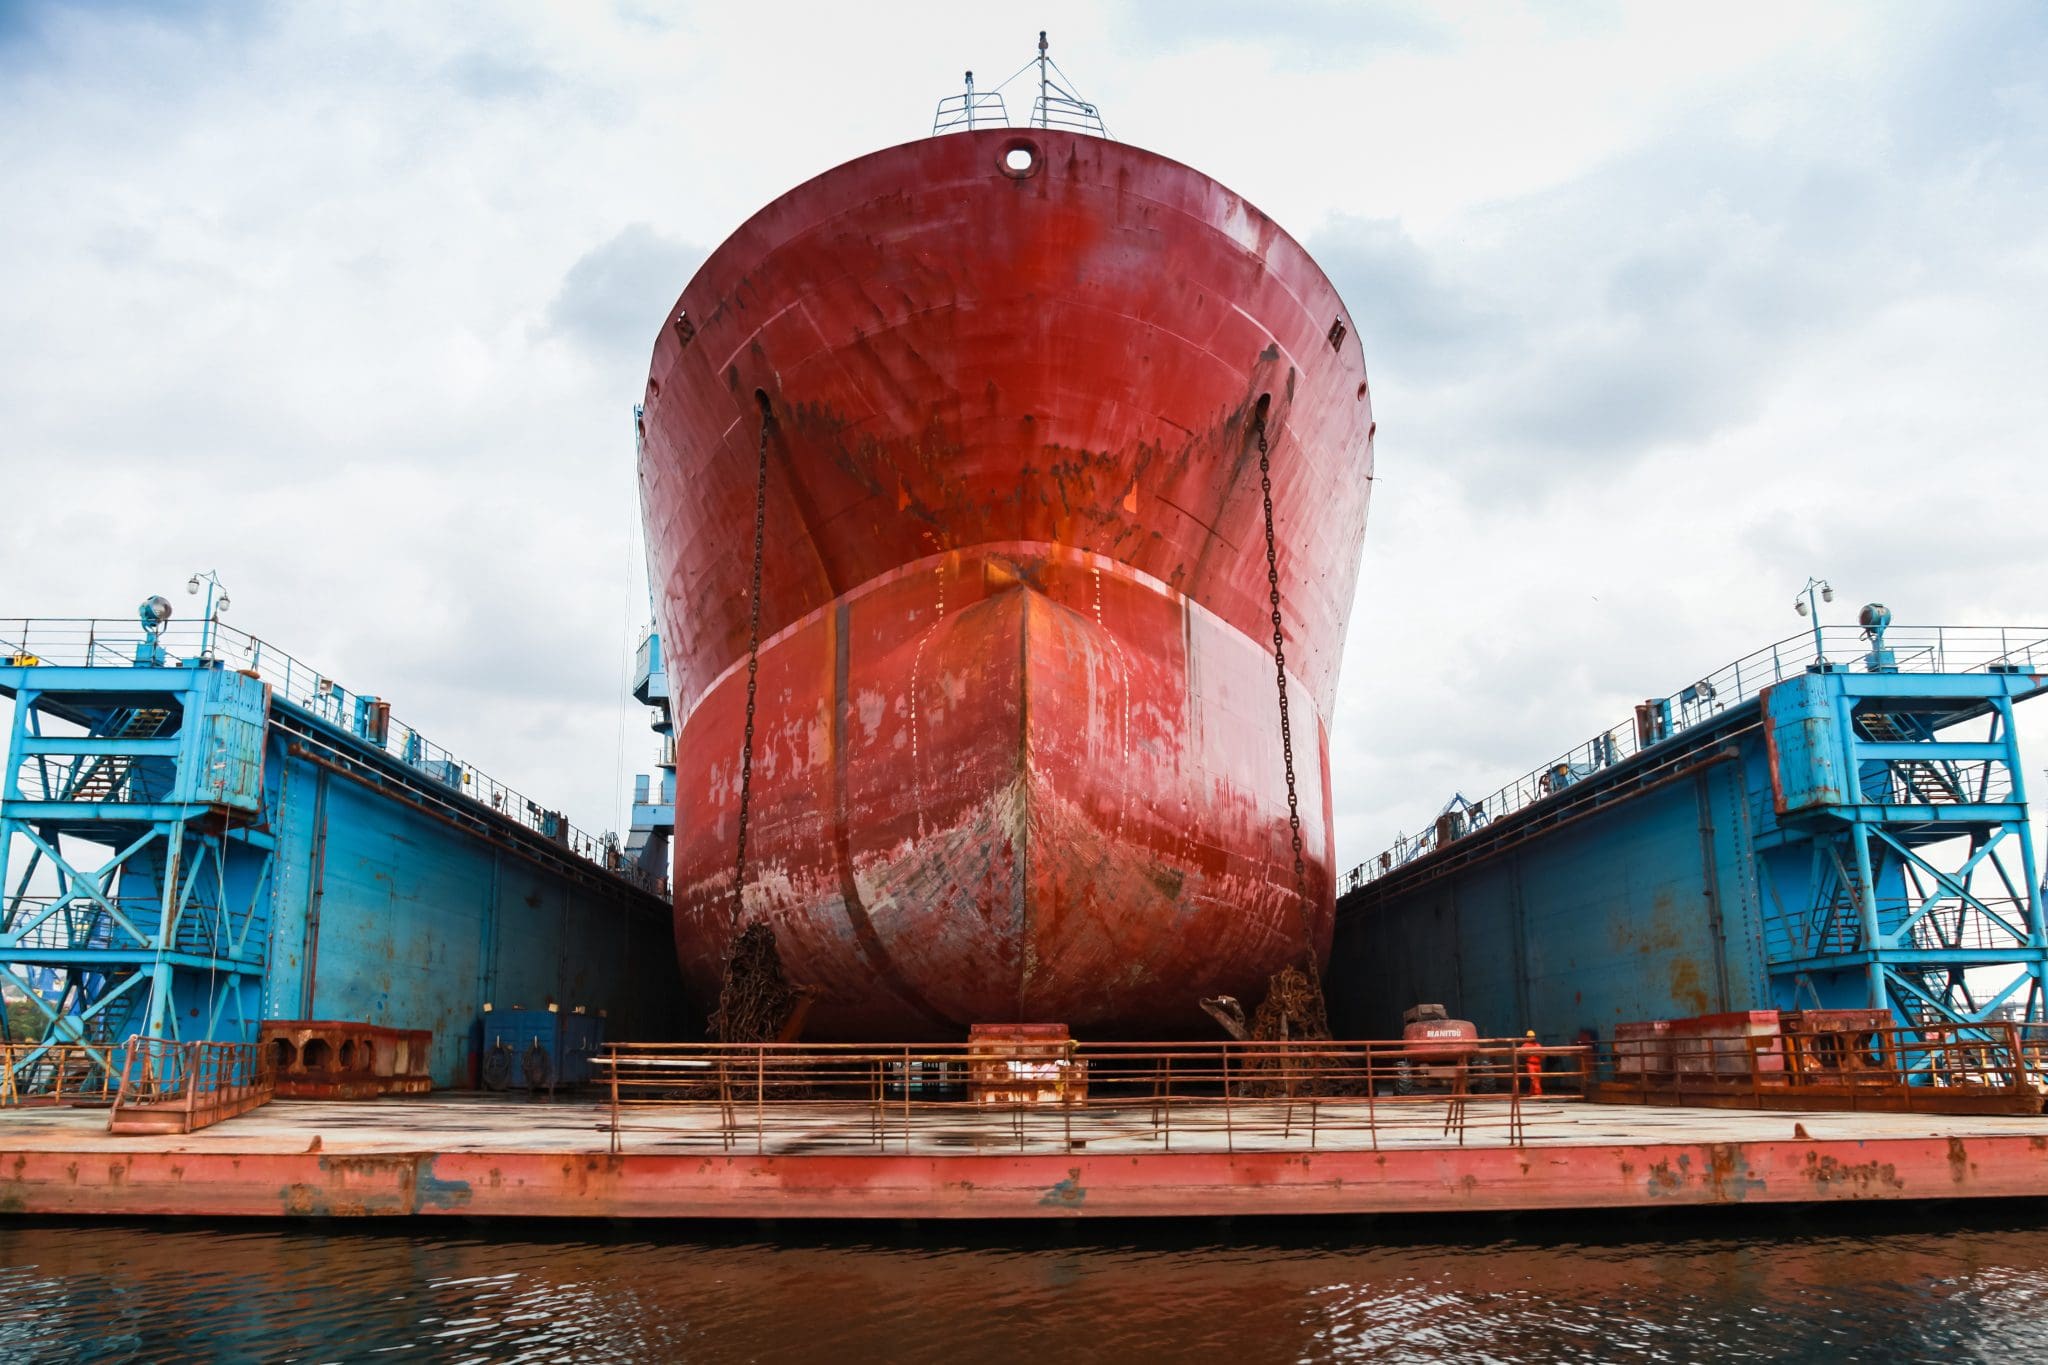 A large red tanker ship docked for repair at a shipyard.